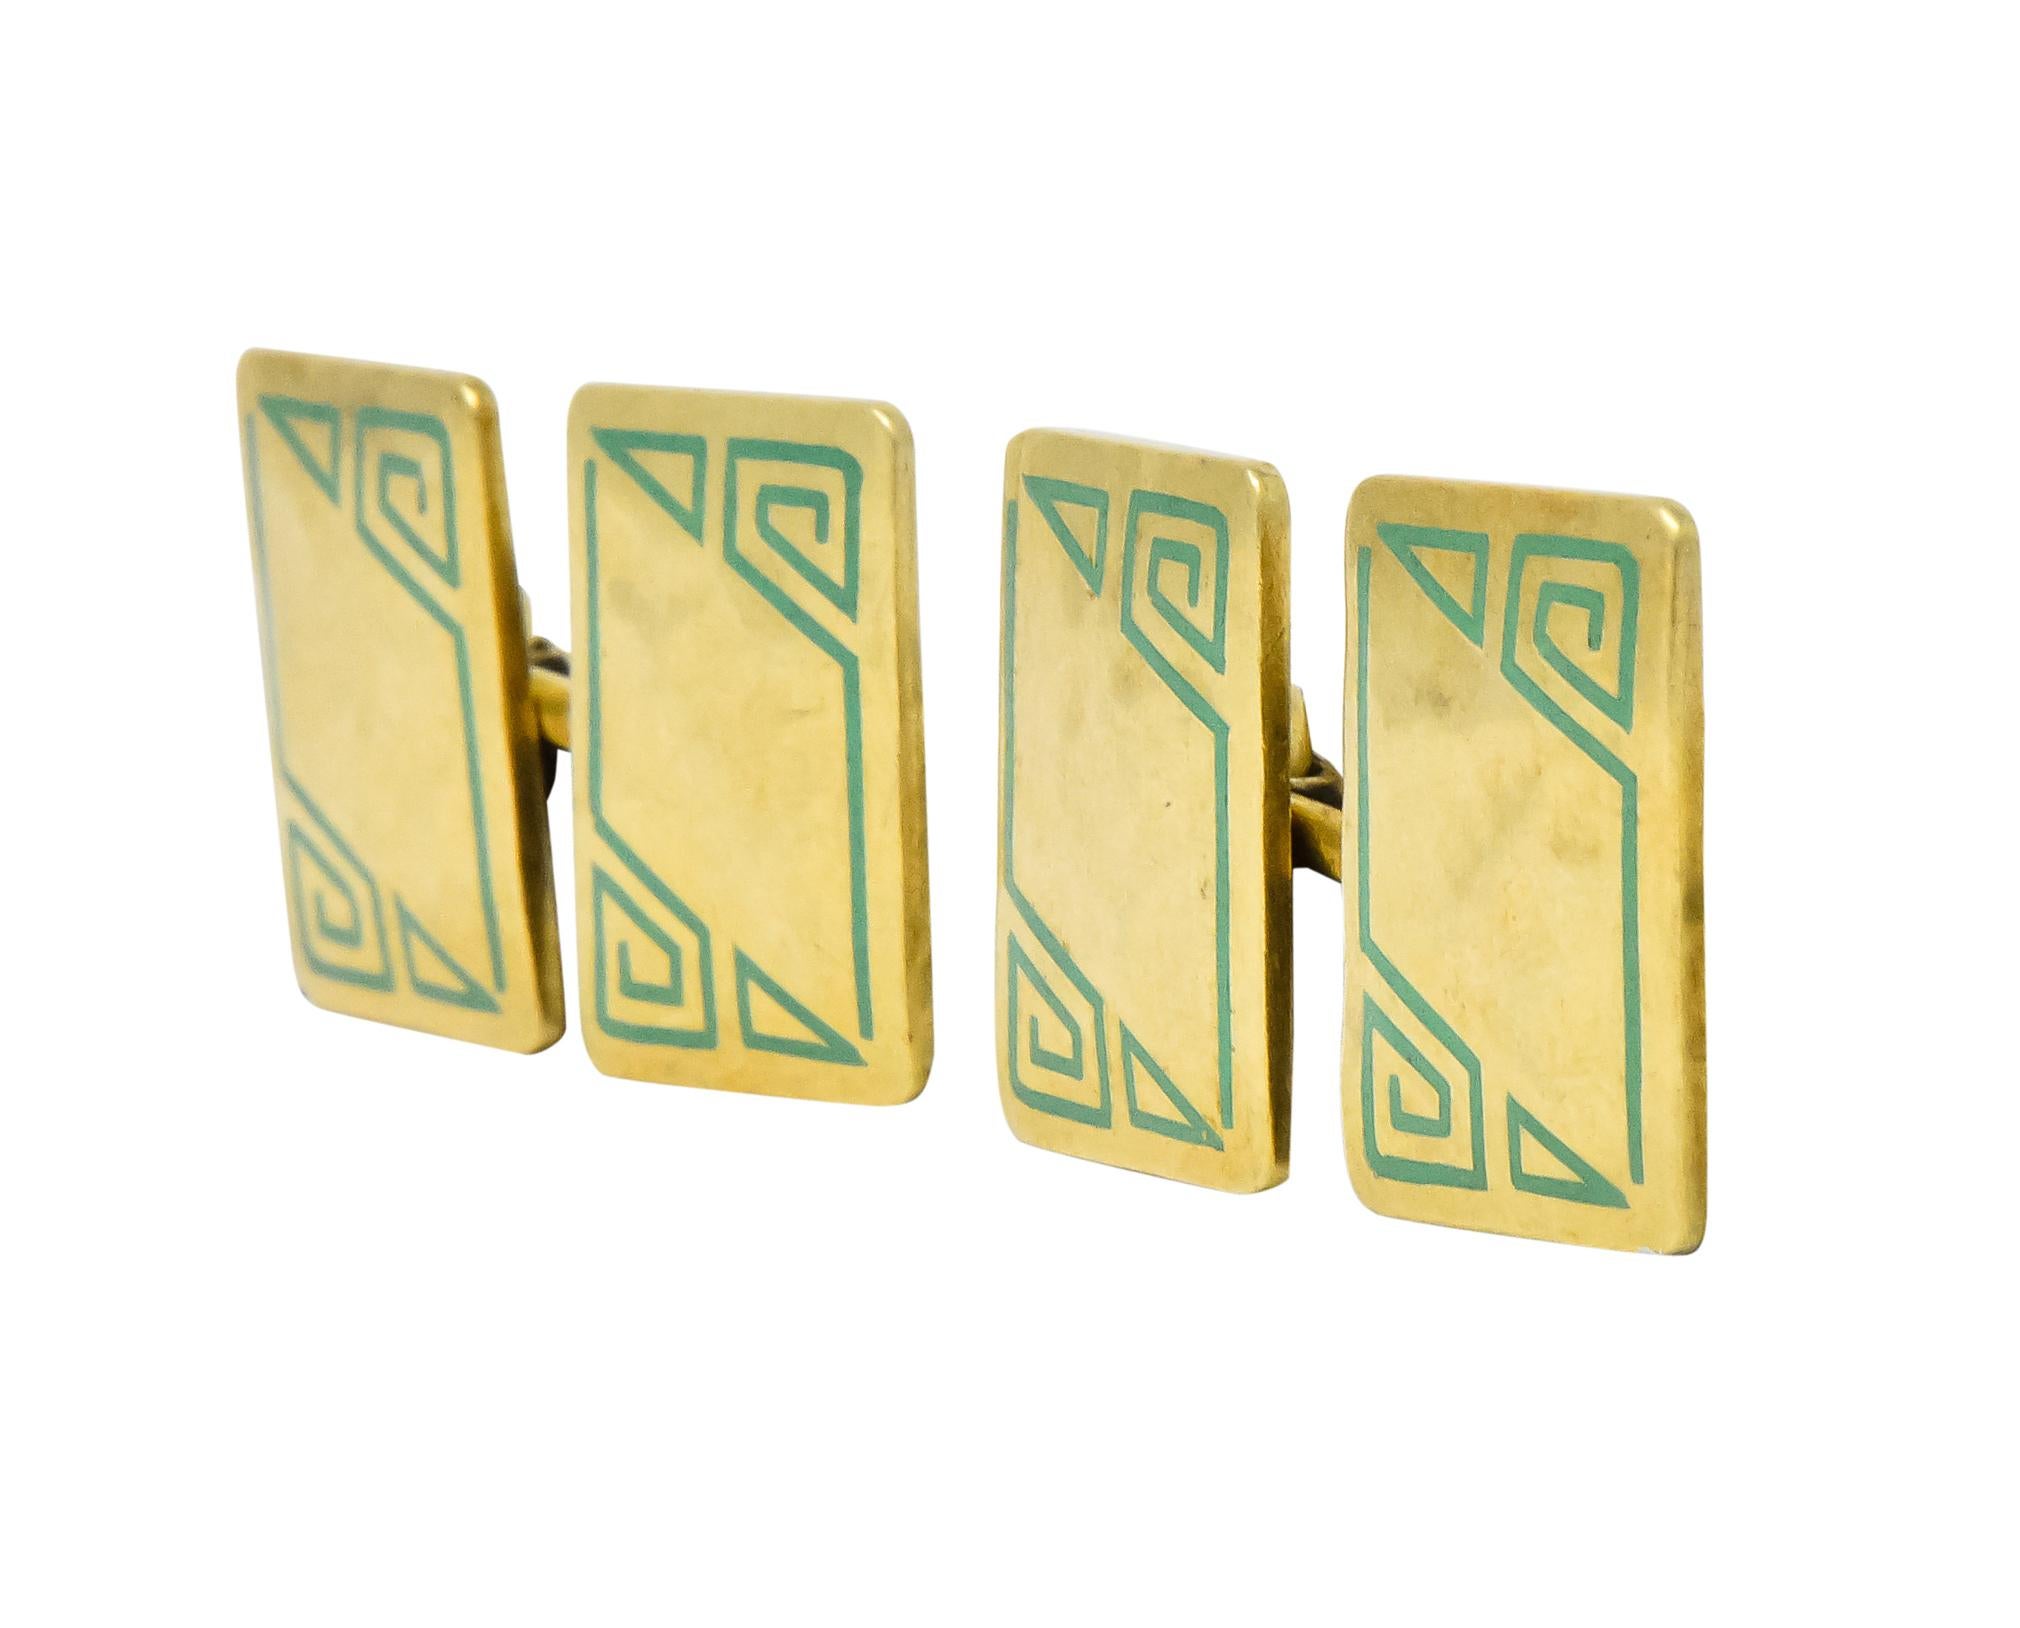 Link style cufflinks, each ending with a hammered gold rectangle measuring approximately 11.4 x 15.8 mm

Surrounded by green enamel boarder depicting a stylized Greek key and triangle

Each initialed 'J.M.' on back

Circa 1930

Maker's mark for